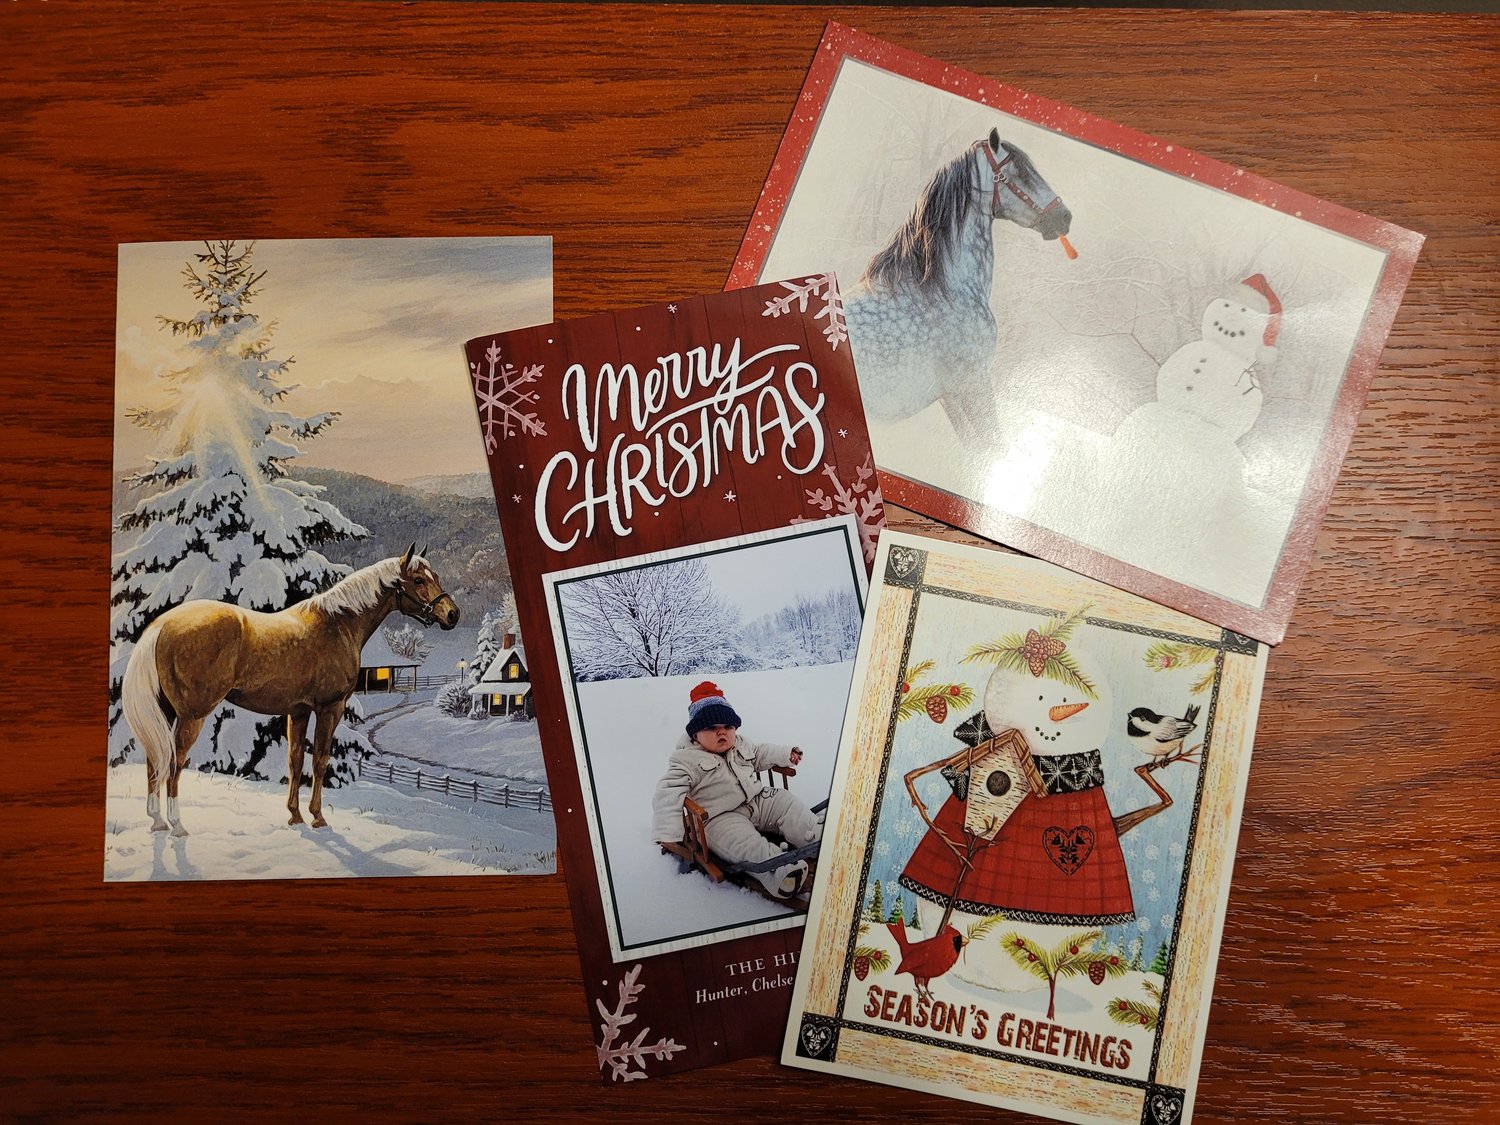 Holiday cards are an inexpensive way to communicate on many levels with friends and family.